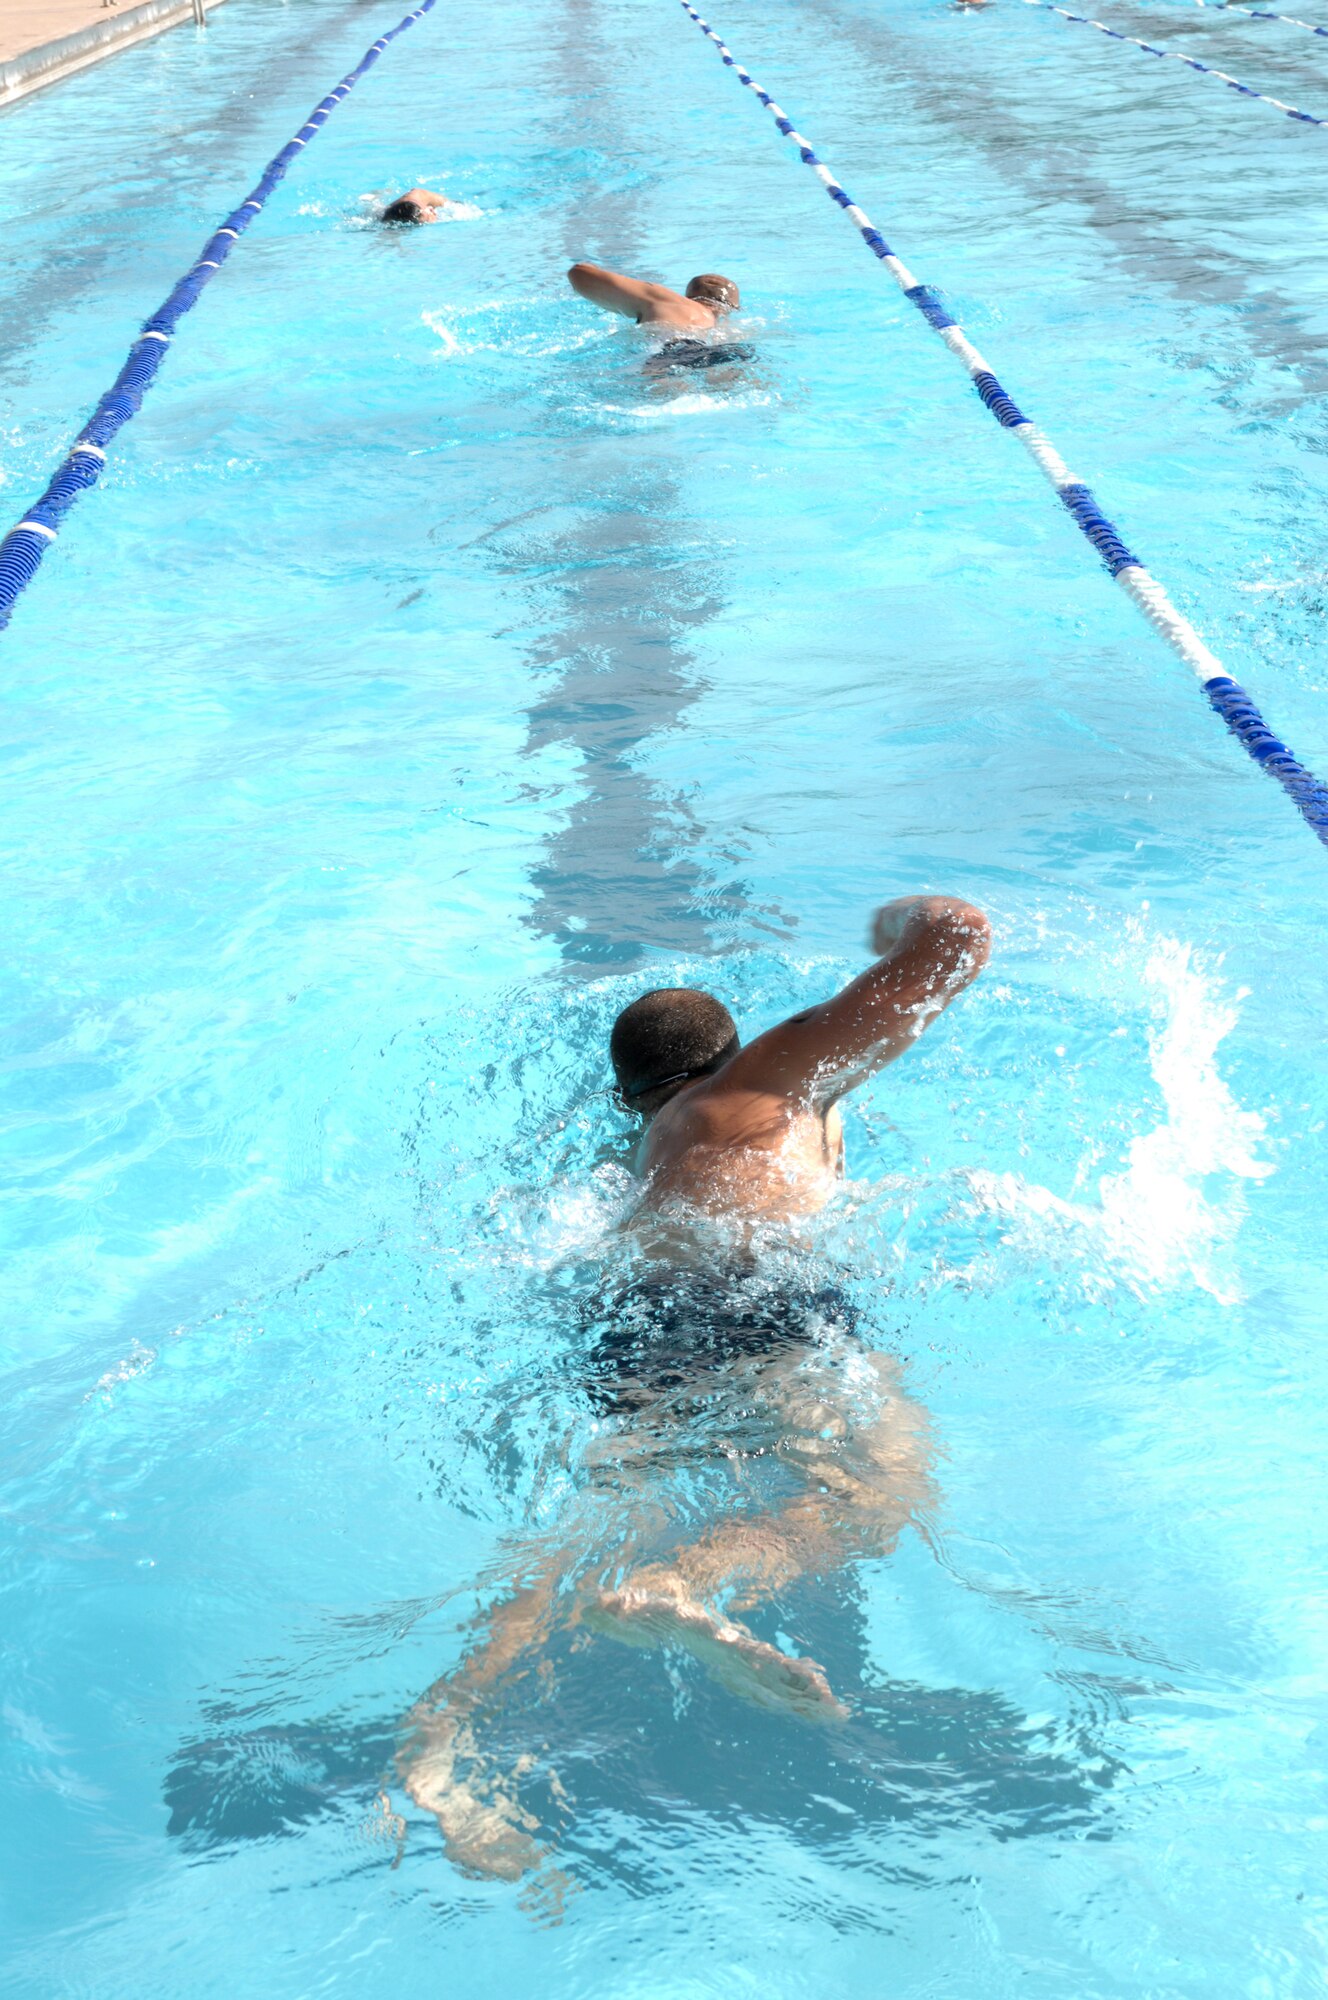 Athletes swim 700 meters in the Aquatic Center pool before completing the annual Triathlon at Holloman Air Force Base, N.M., October 21. The Triathlon was open to everyone who signed up and more than 60 athletes participated.  (U.S. Air Force photo/Airman Sondra M. Escutia)